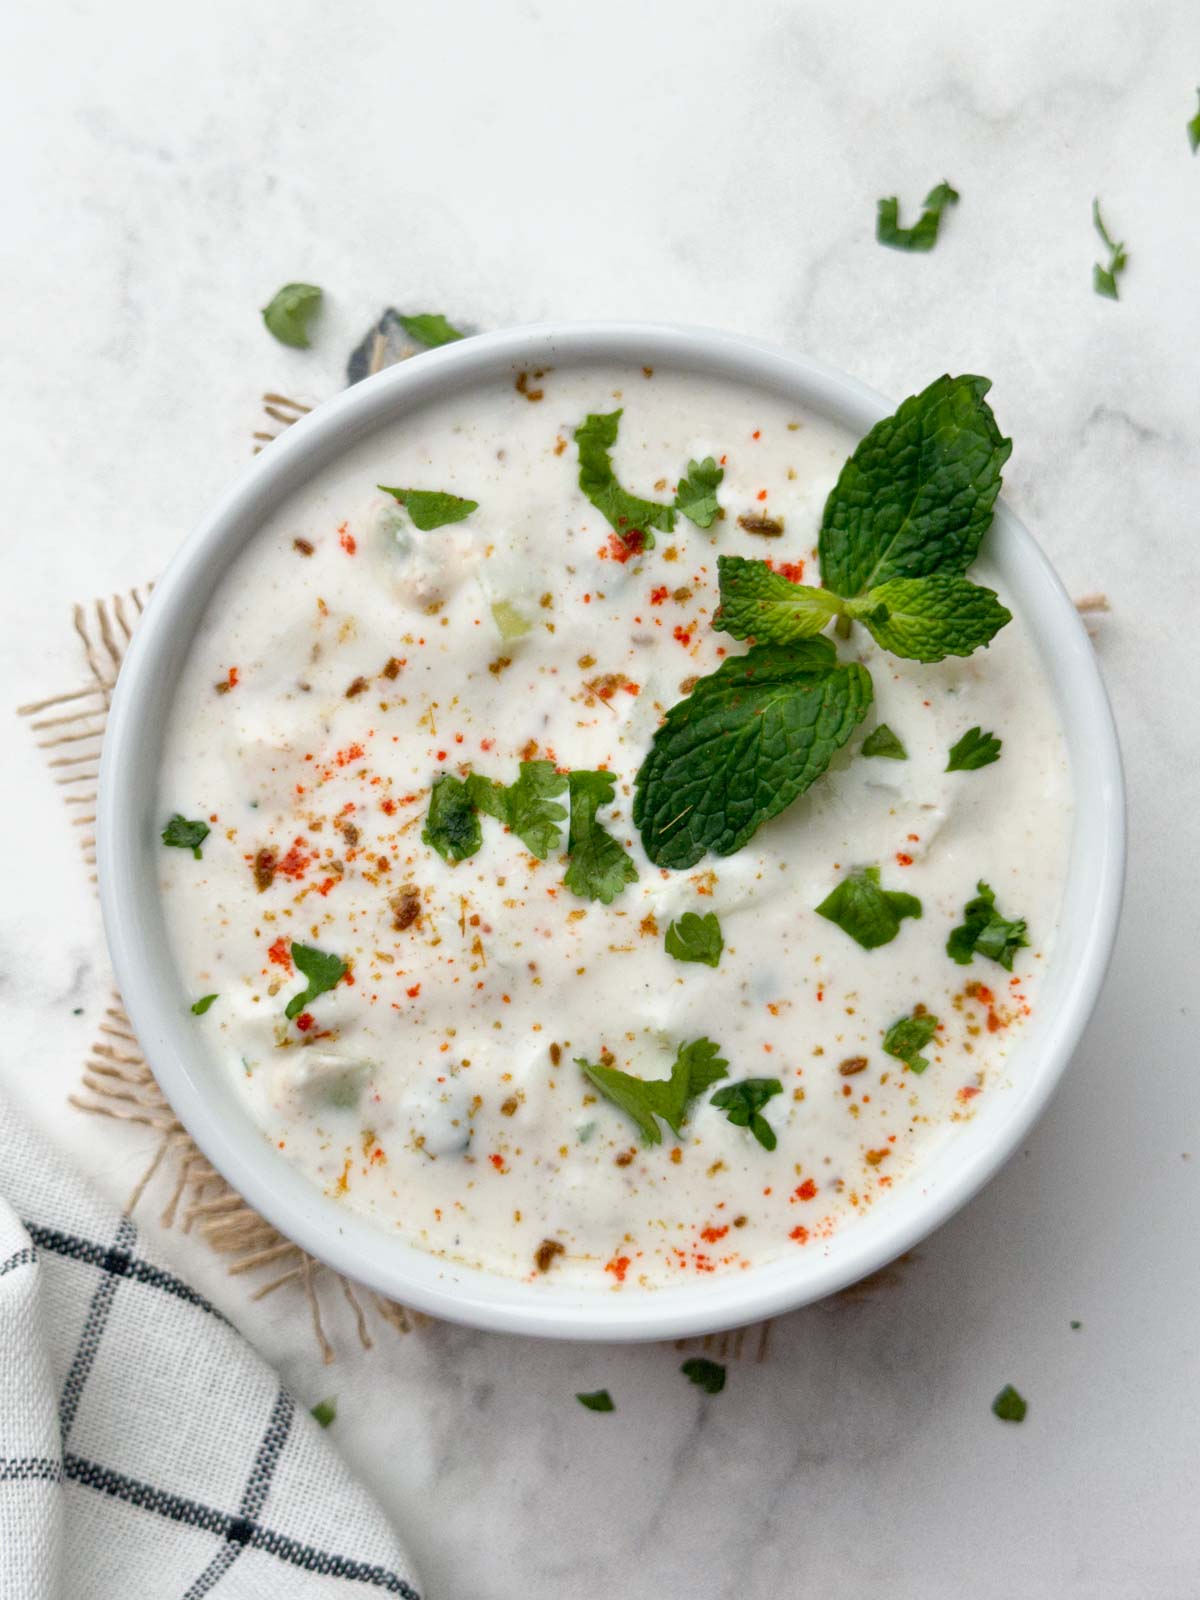 cucumber raita served in a bowl garnished with coriander and mint leaves